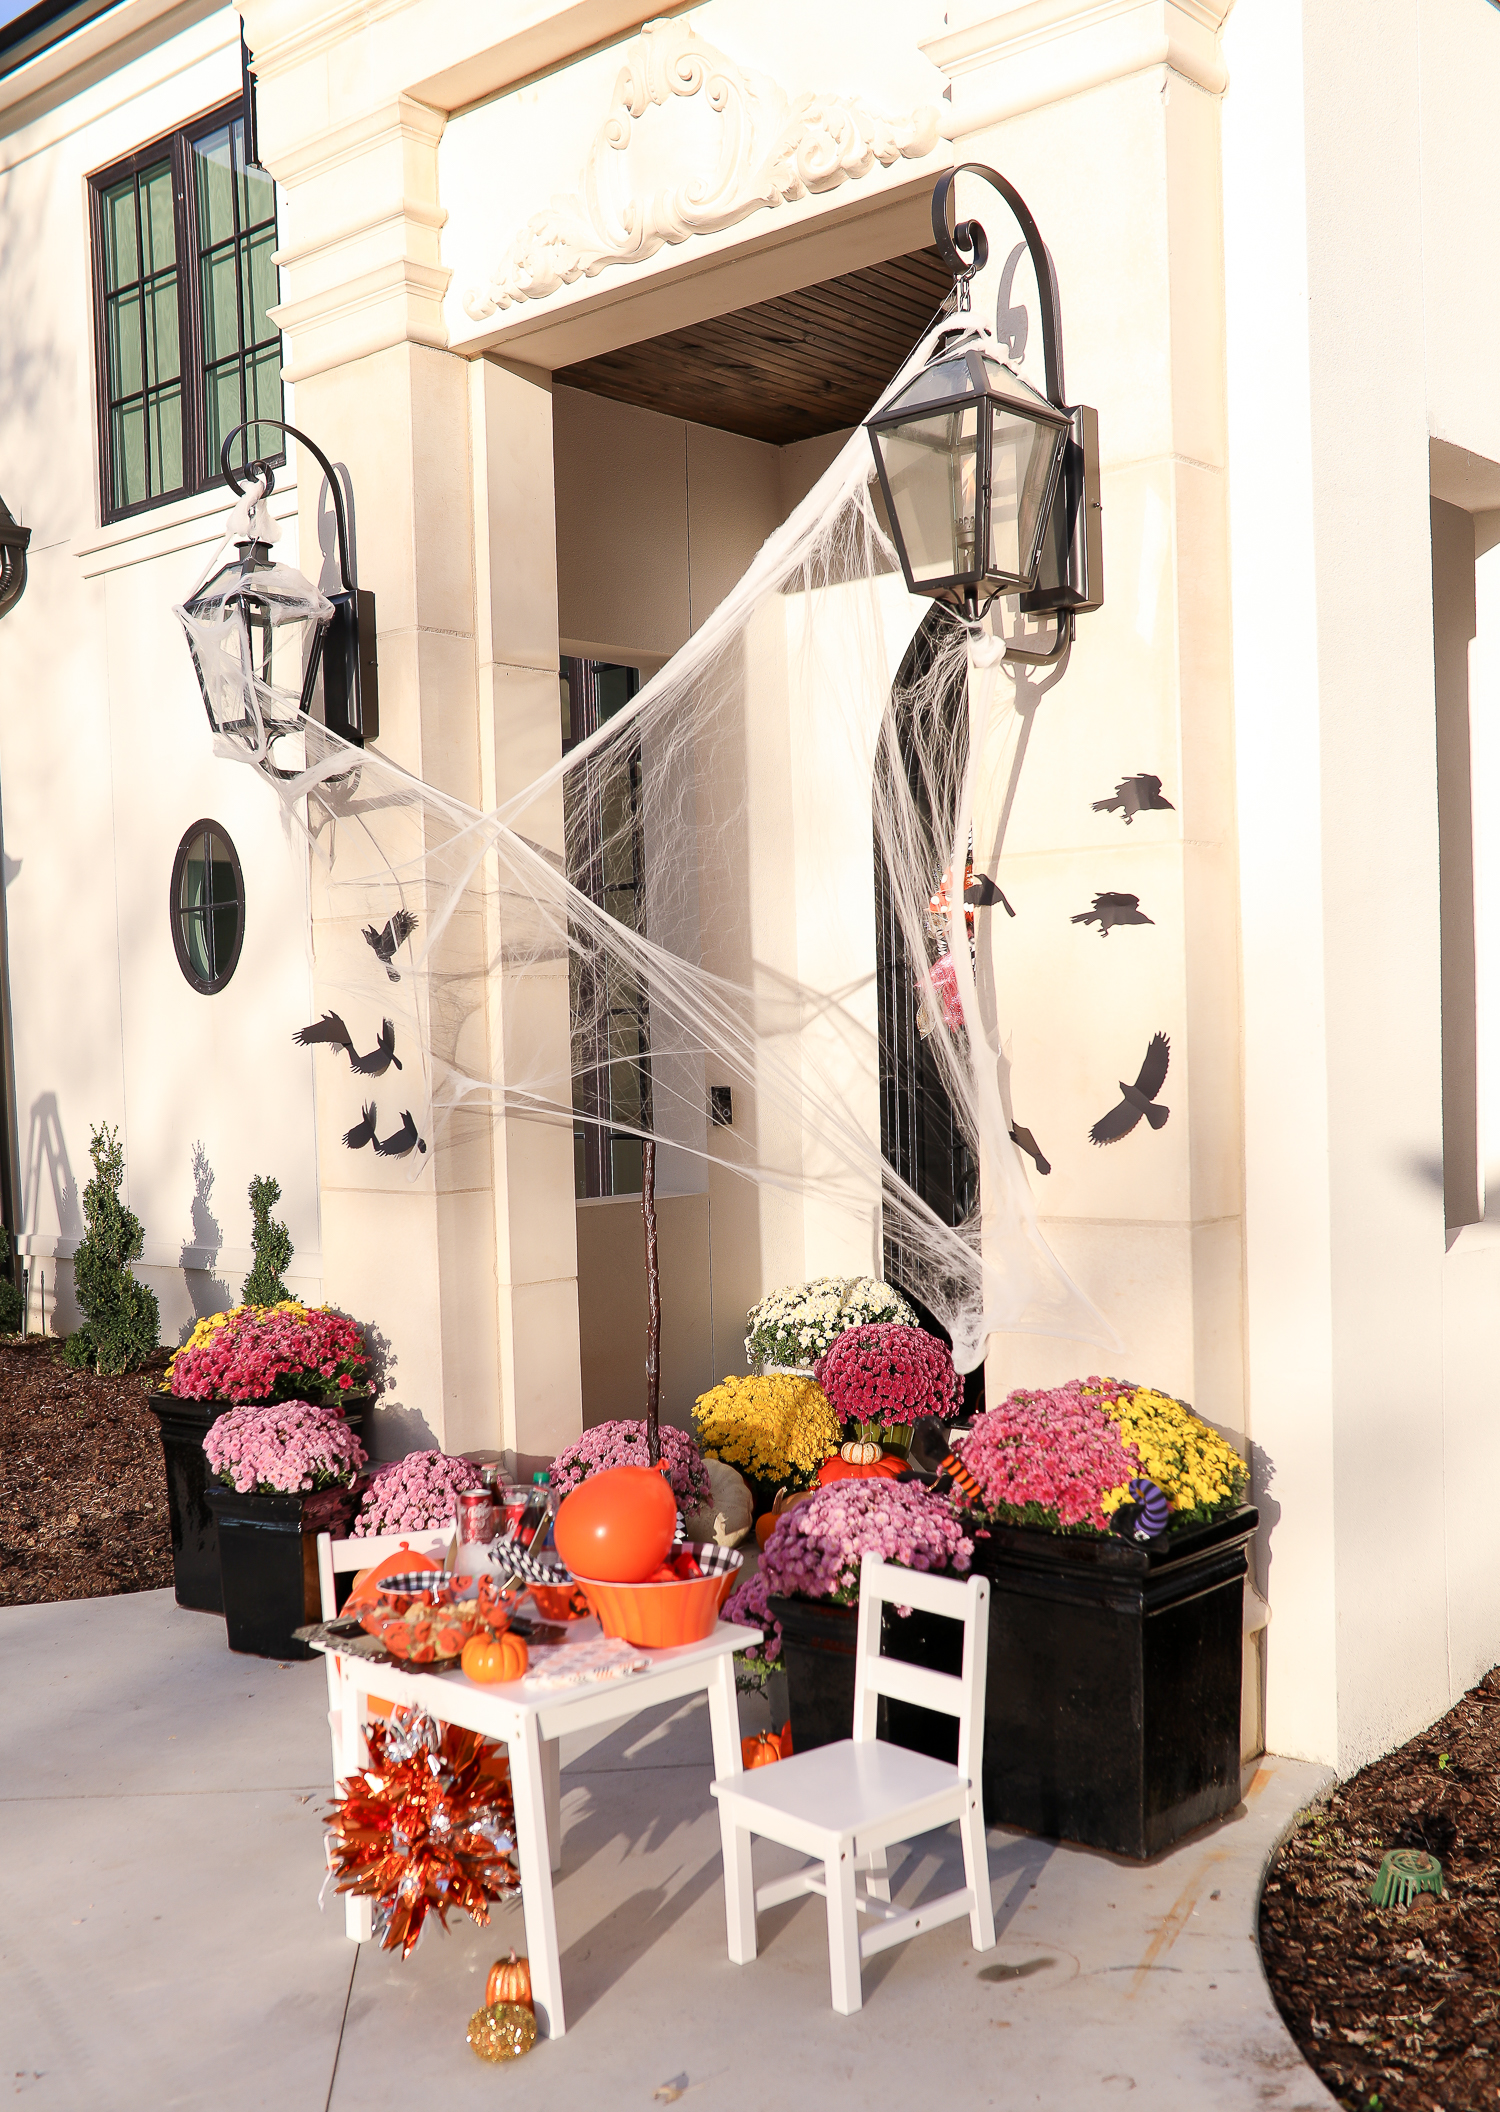 Easy Halloween Party At Home featured by top US life and style blog, The Sweetest Thing: Walmart Halloween Decor